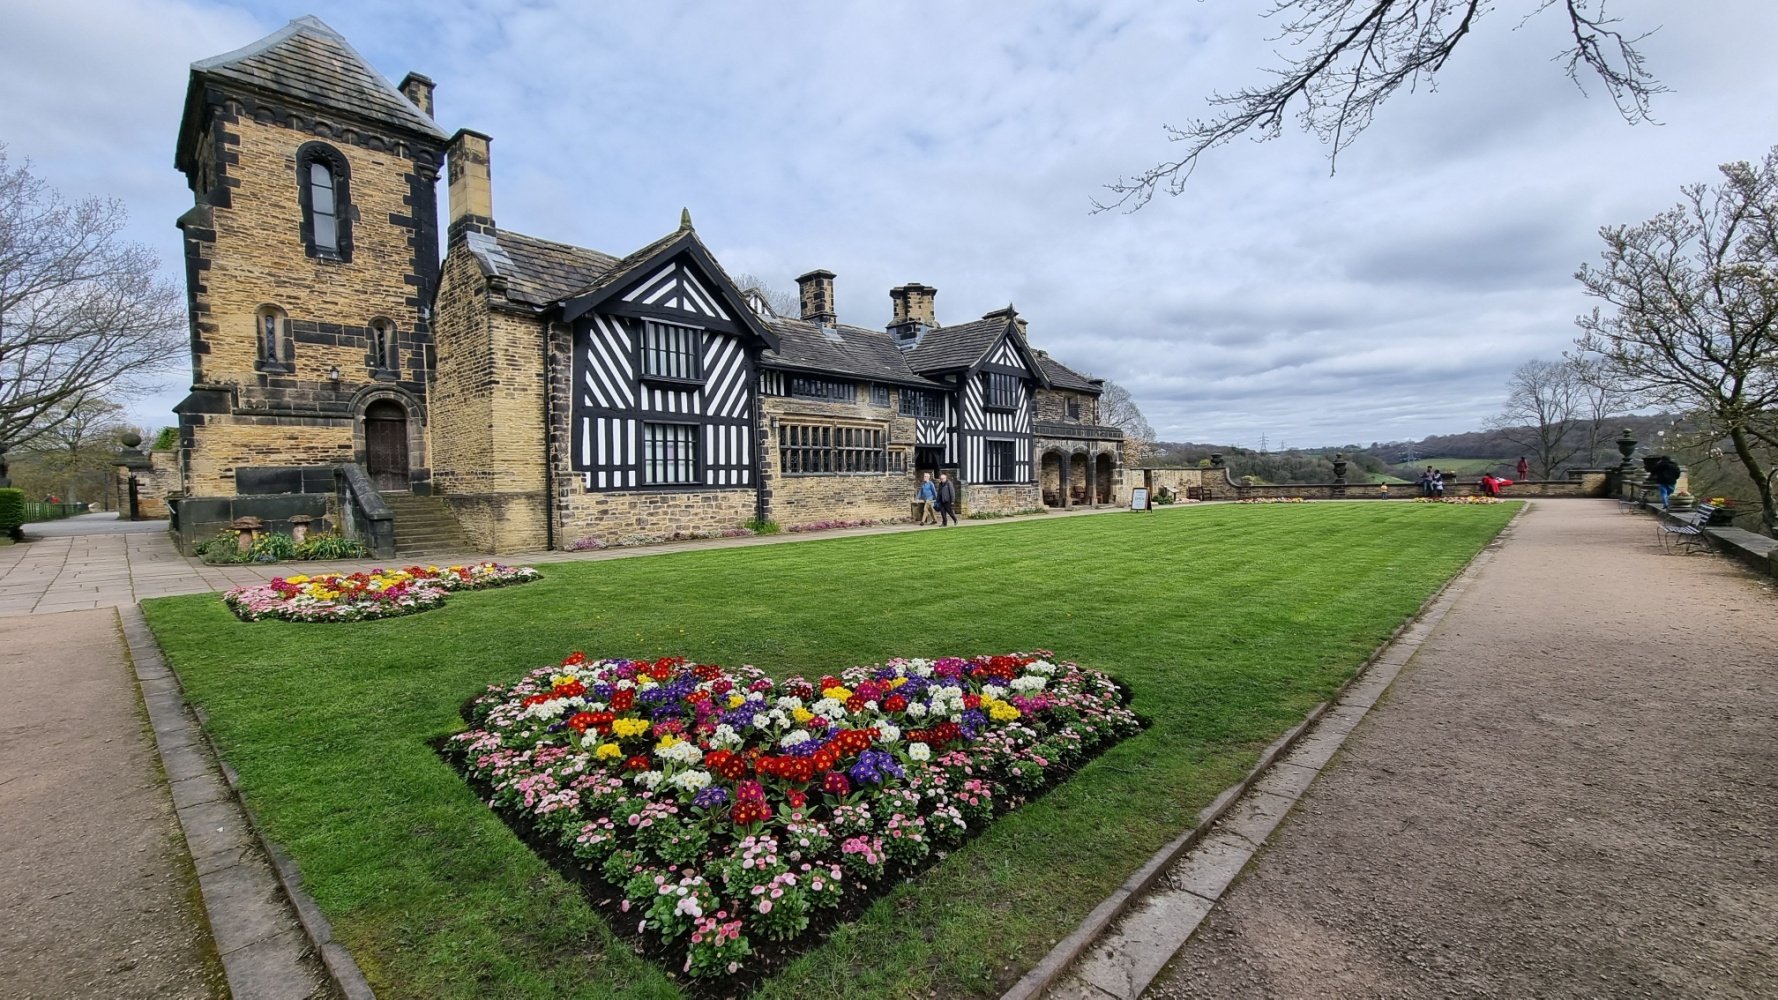 Image name shibden hall halifax west yorkshire the 8 image from the post A look at the history of Shibden Hall, with Dr Emma Wells in Yorkshire.com.